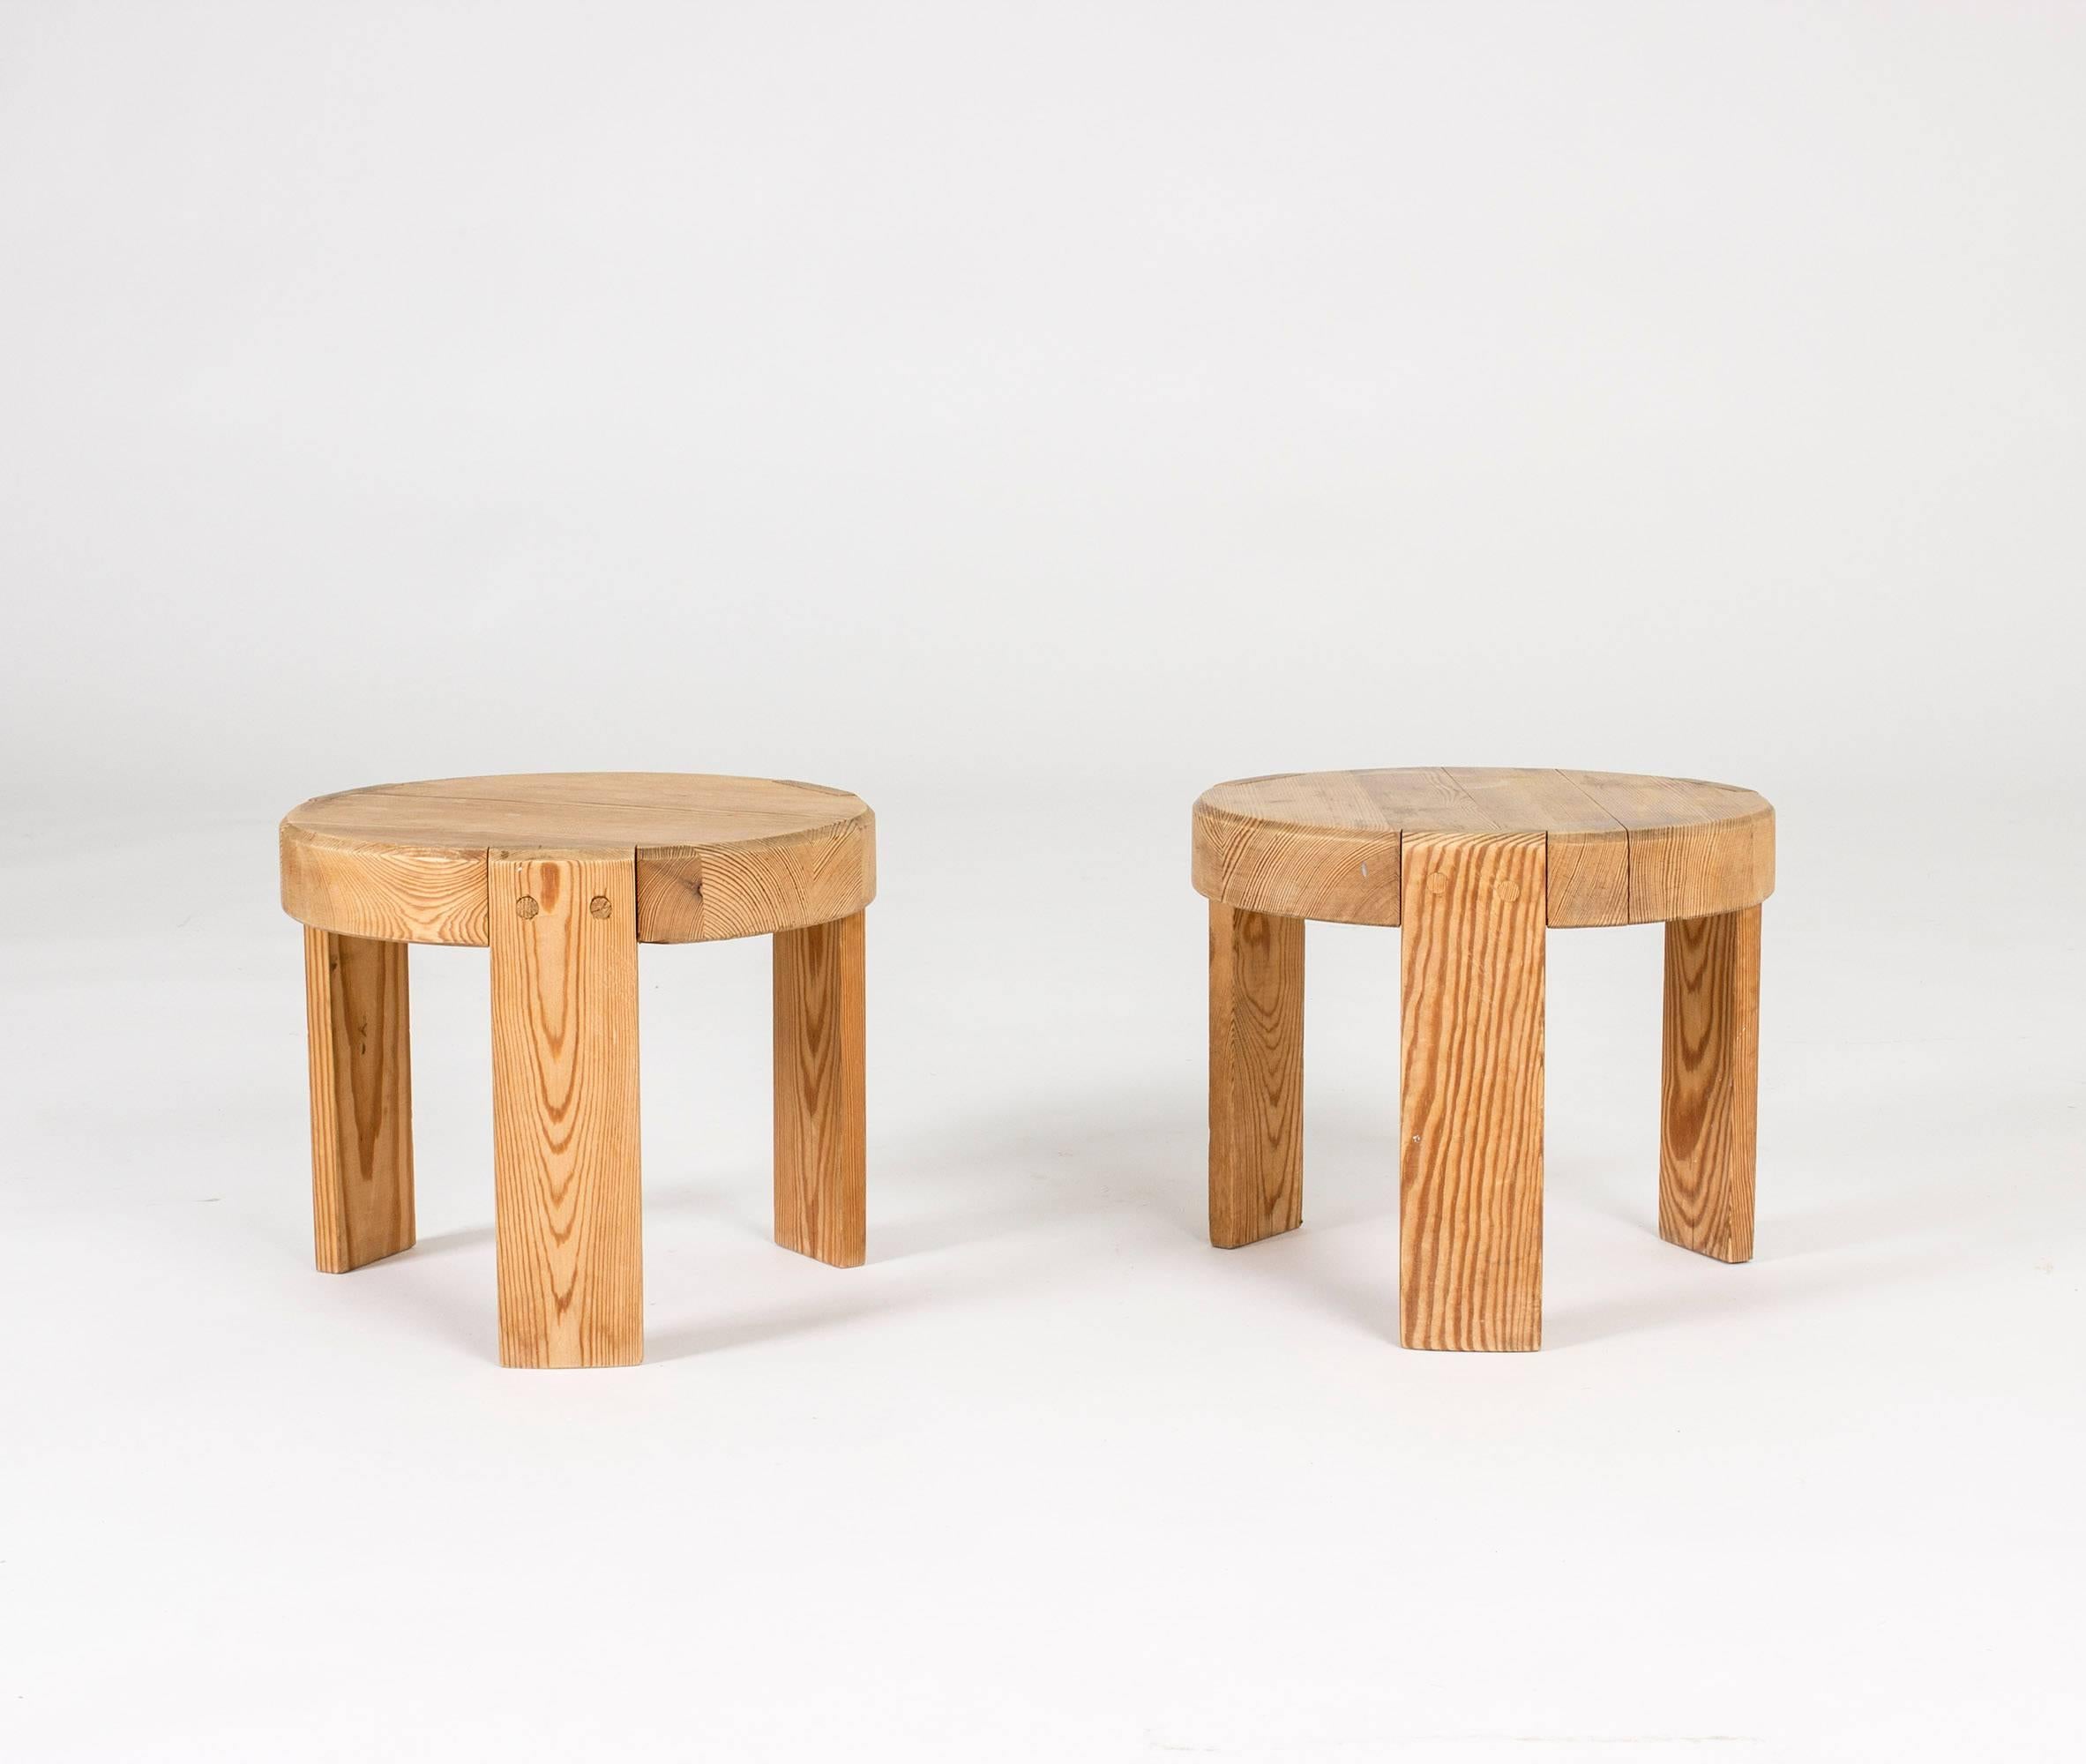 Pair of cool Swedish 1930s miniature stools, made from pine. Nice angles and proportions and contrasting directions of the wood grain.